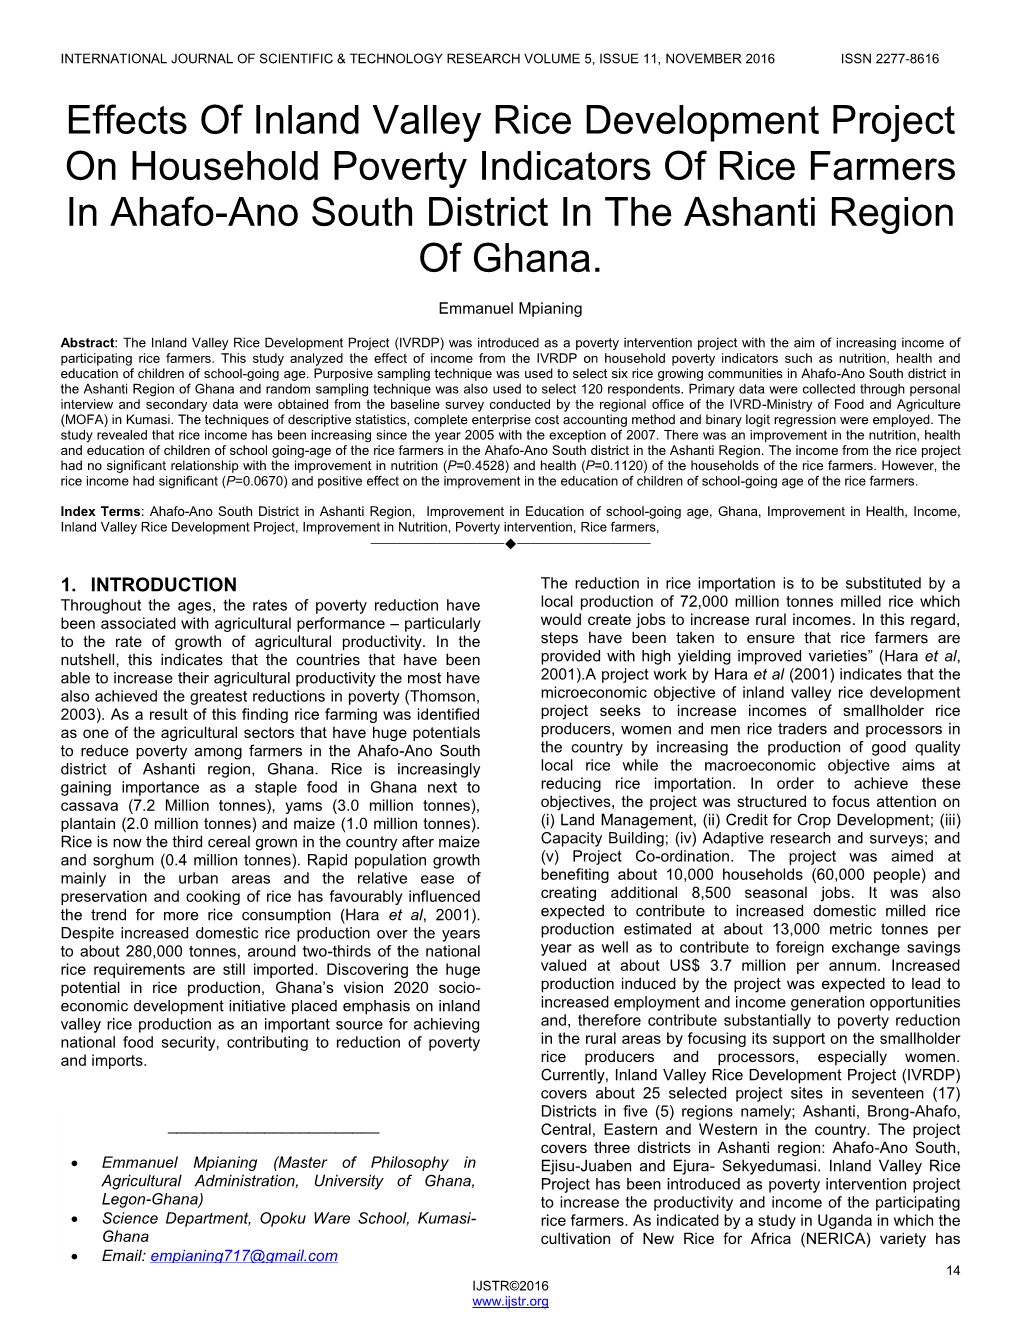 Effects of Inland Valley Rice Development Project on Household Poverty Indicators of Rice Farmers in Ahafo-Ano South District in the Ashanti Region of Ghana